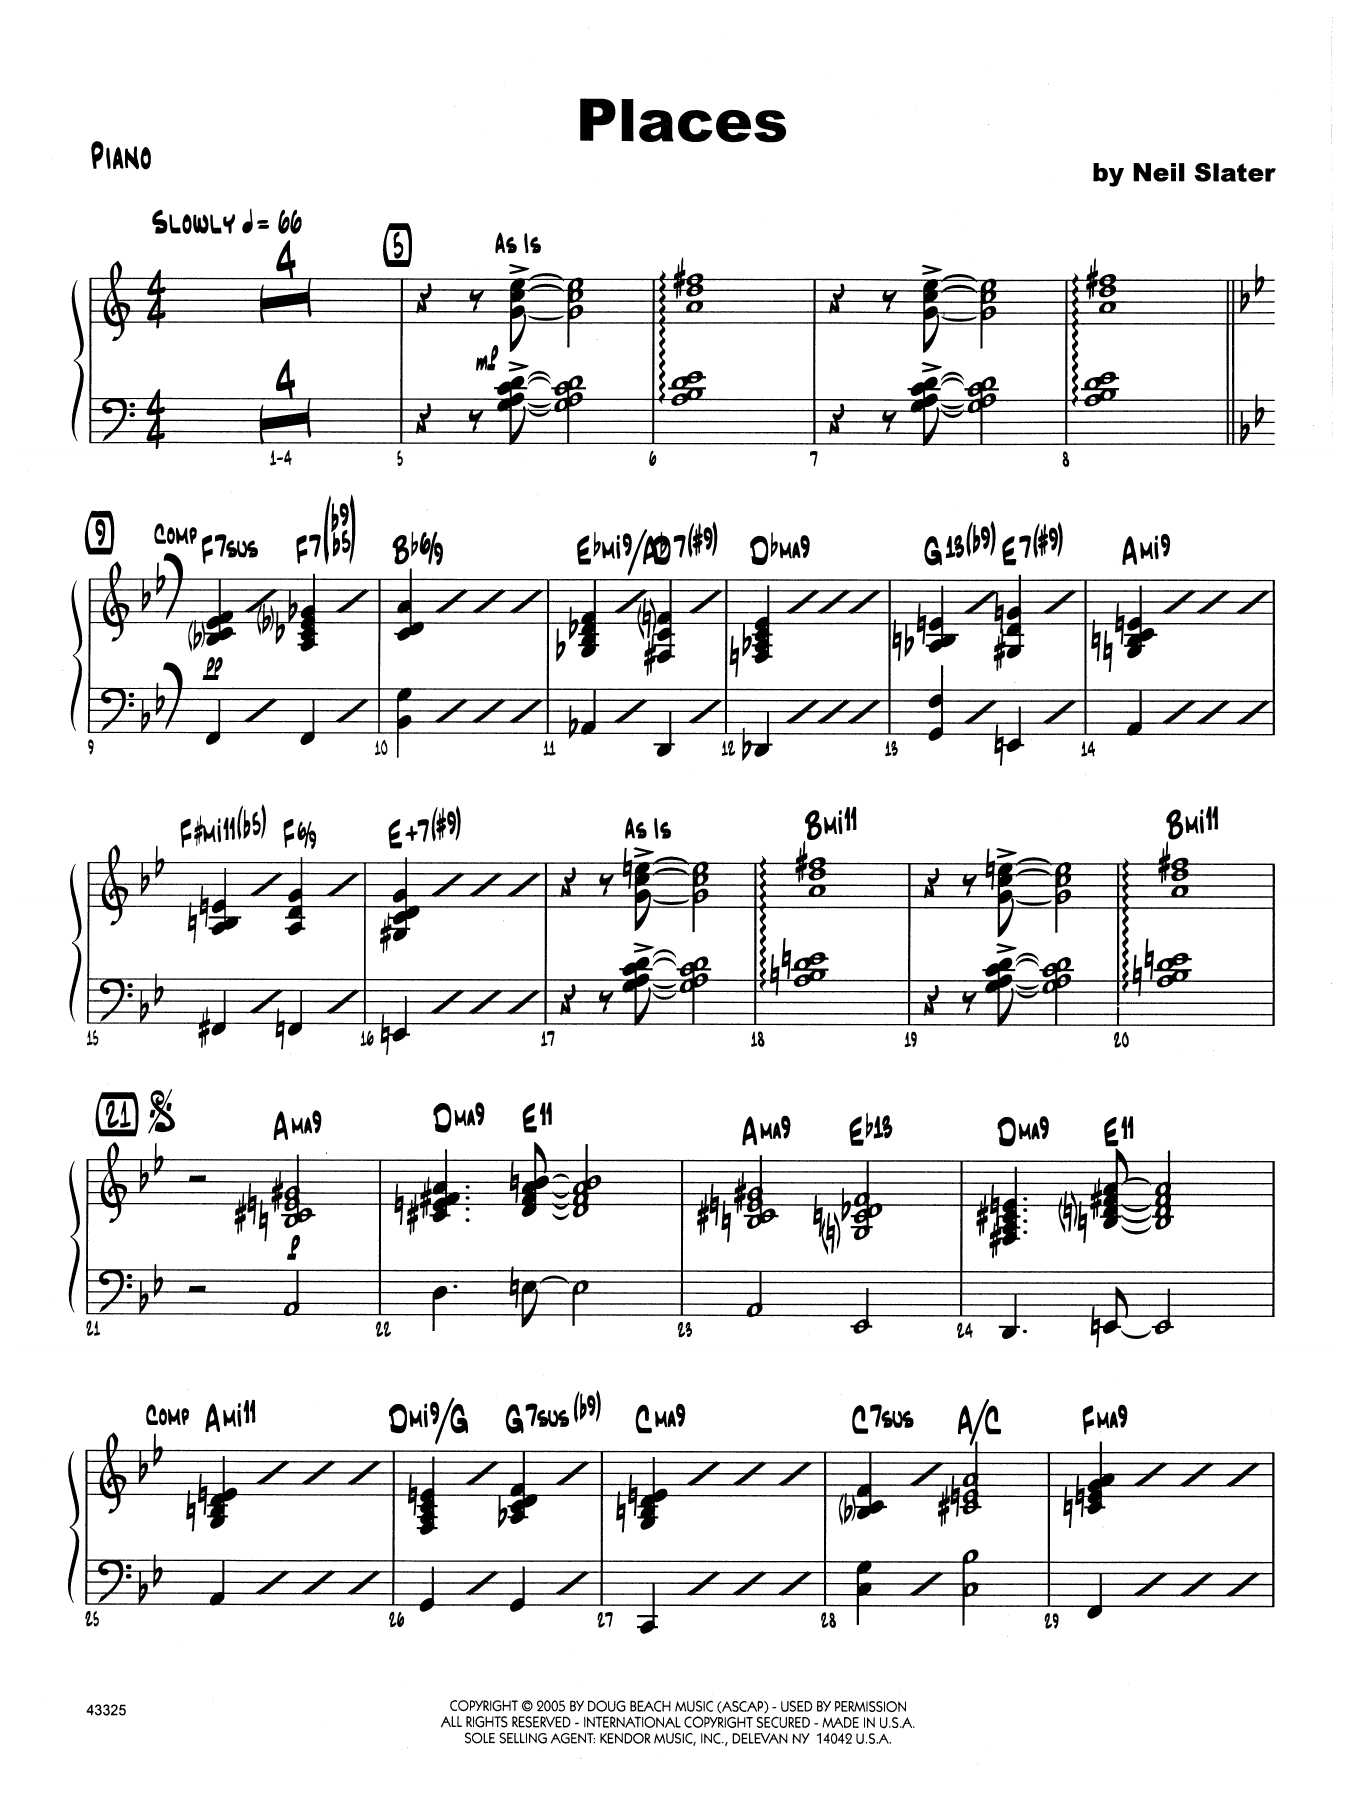 Download Neil Slater Places - Piano Sheet Music